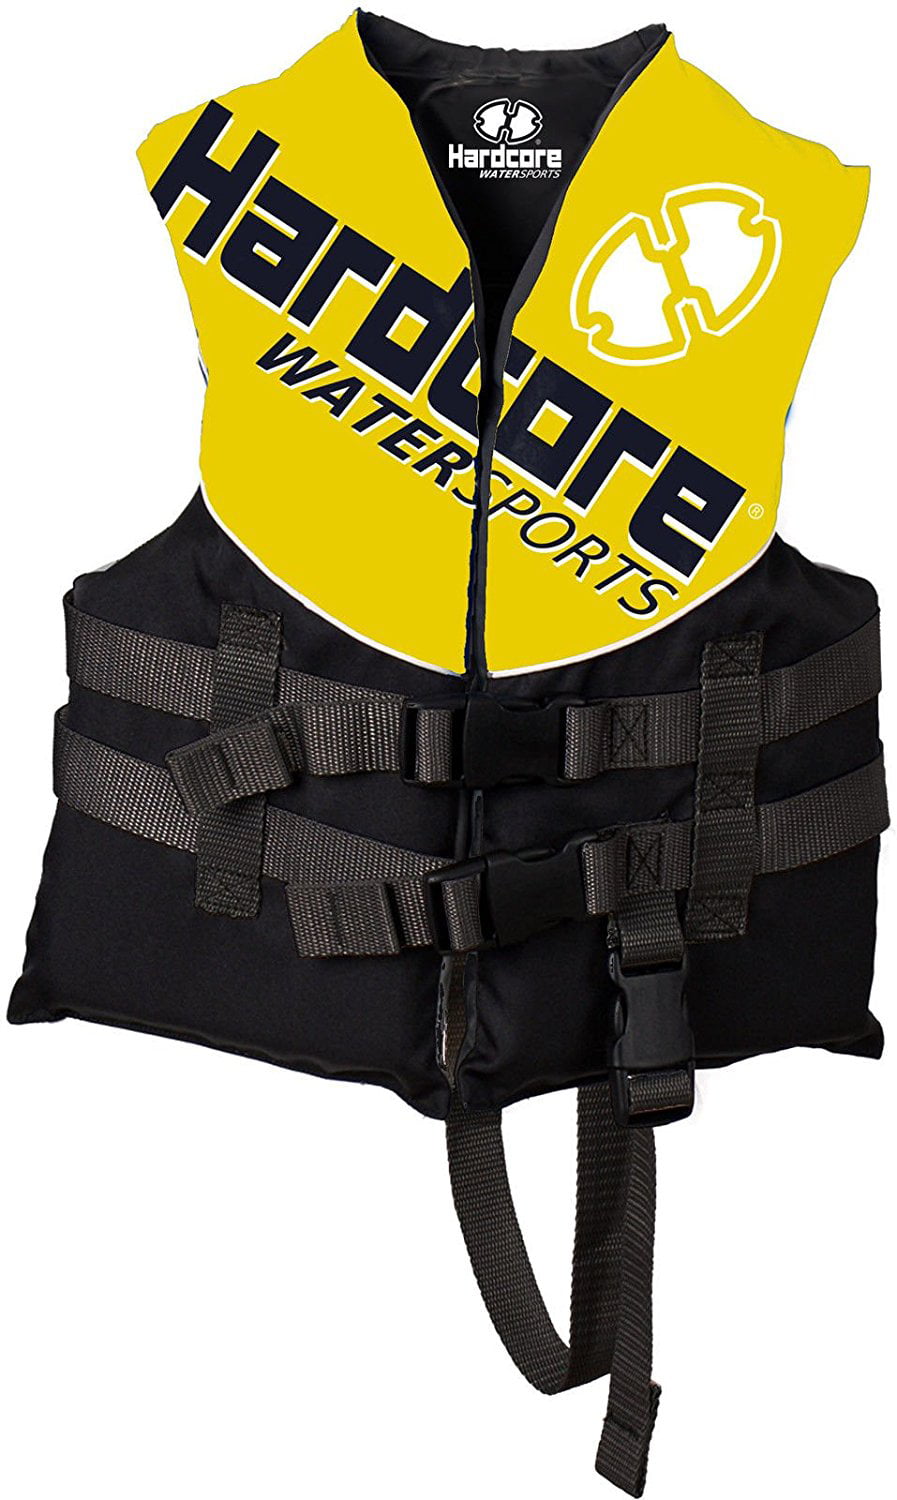 Details about   Small Child 30 to 50 lbs Lifevest Life Jacket PFD Yellow Coast Guard Approved